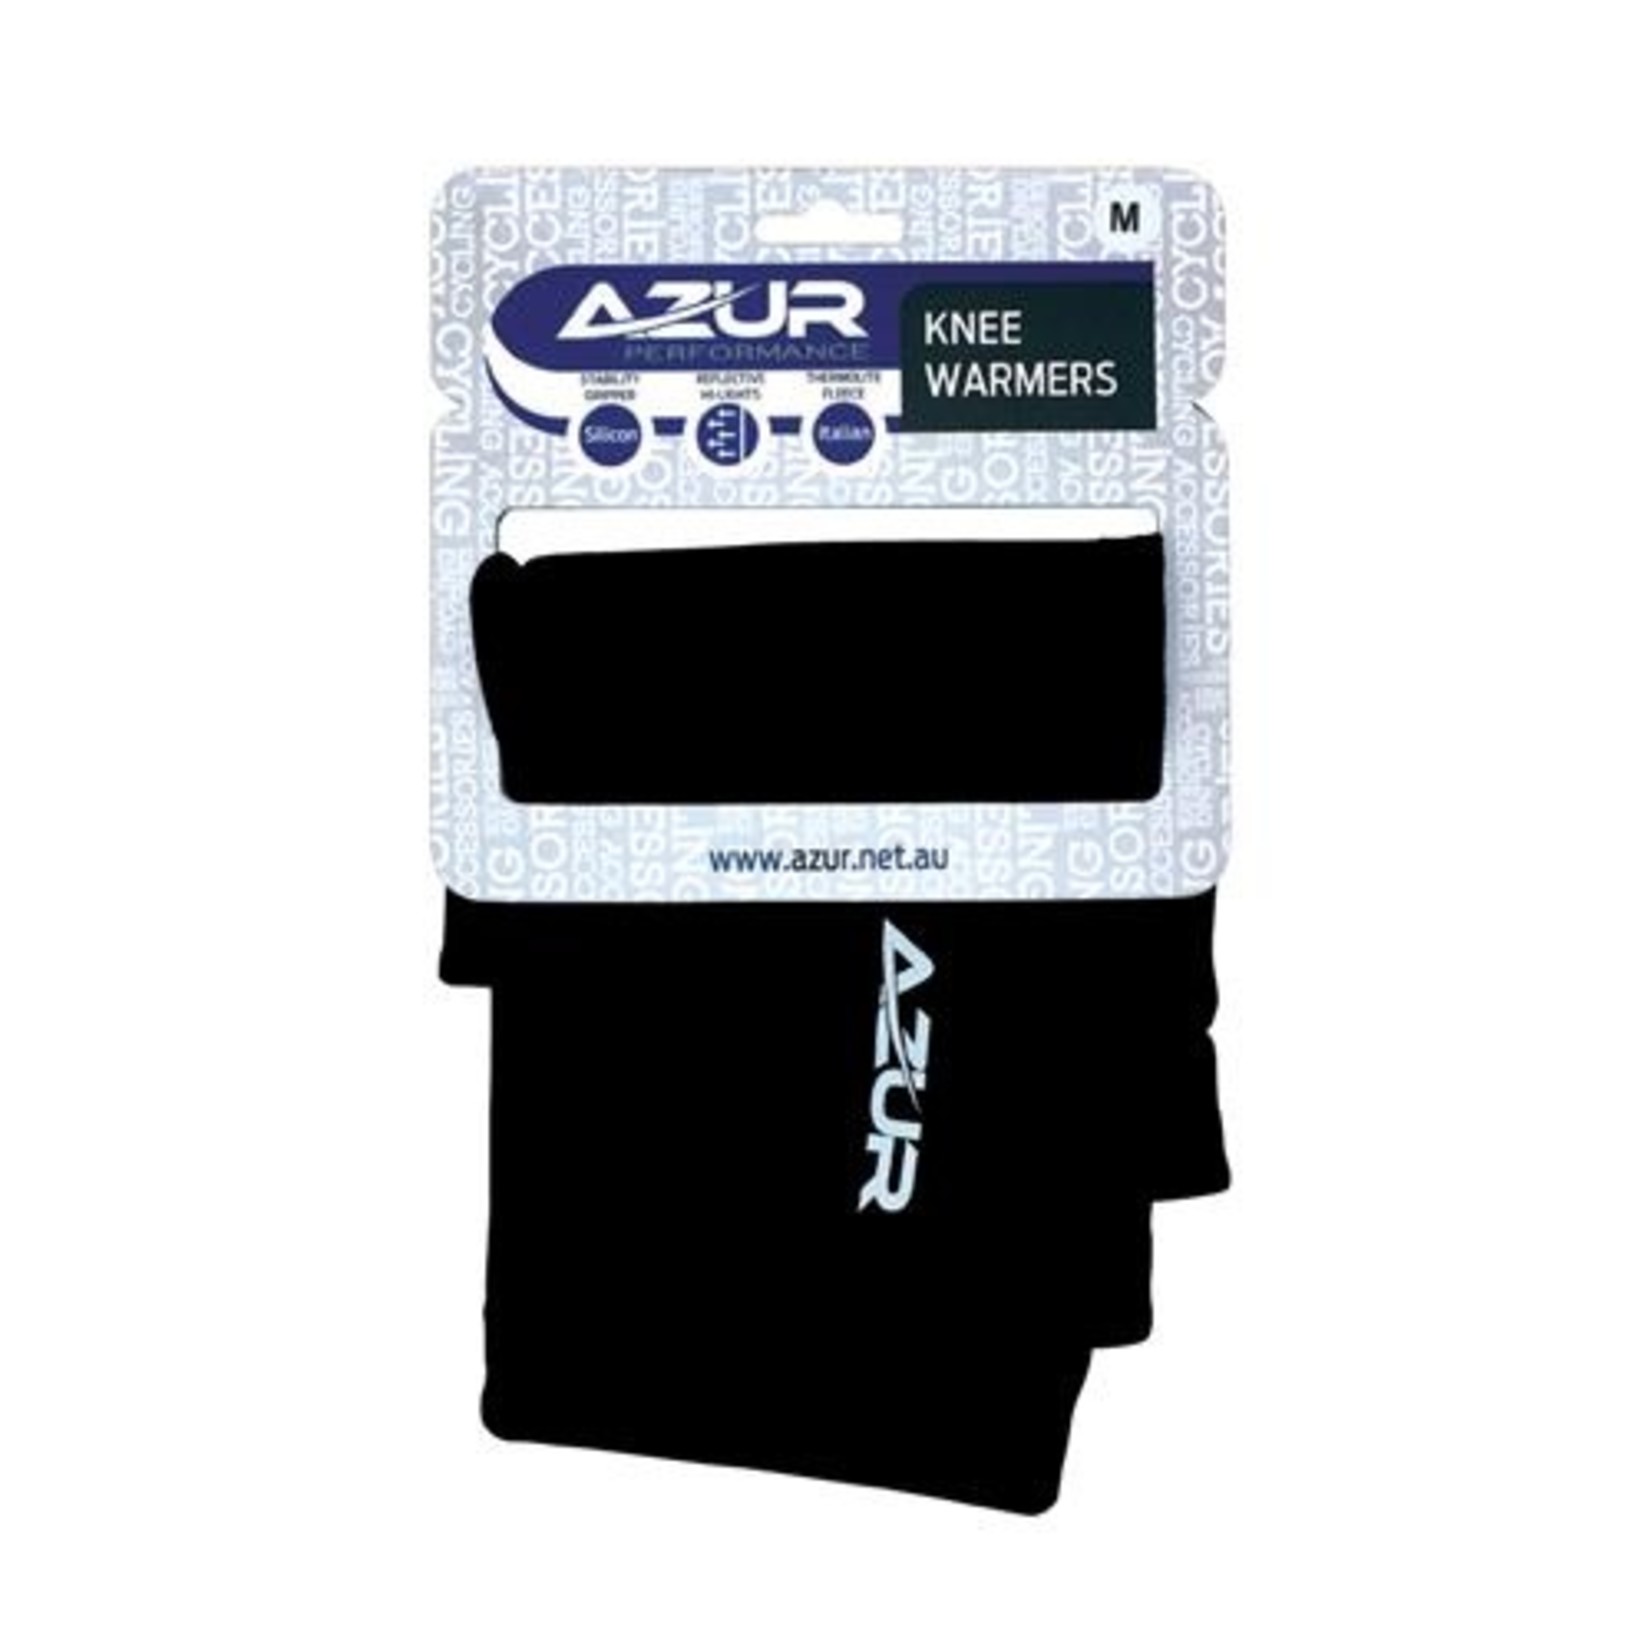 Azur Azur Knee Warmers Silicon Grippers And Offset Seams - Medium